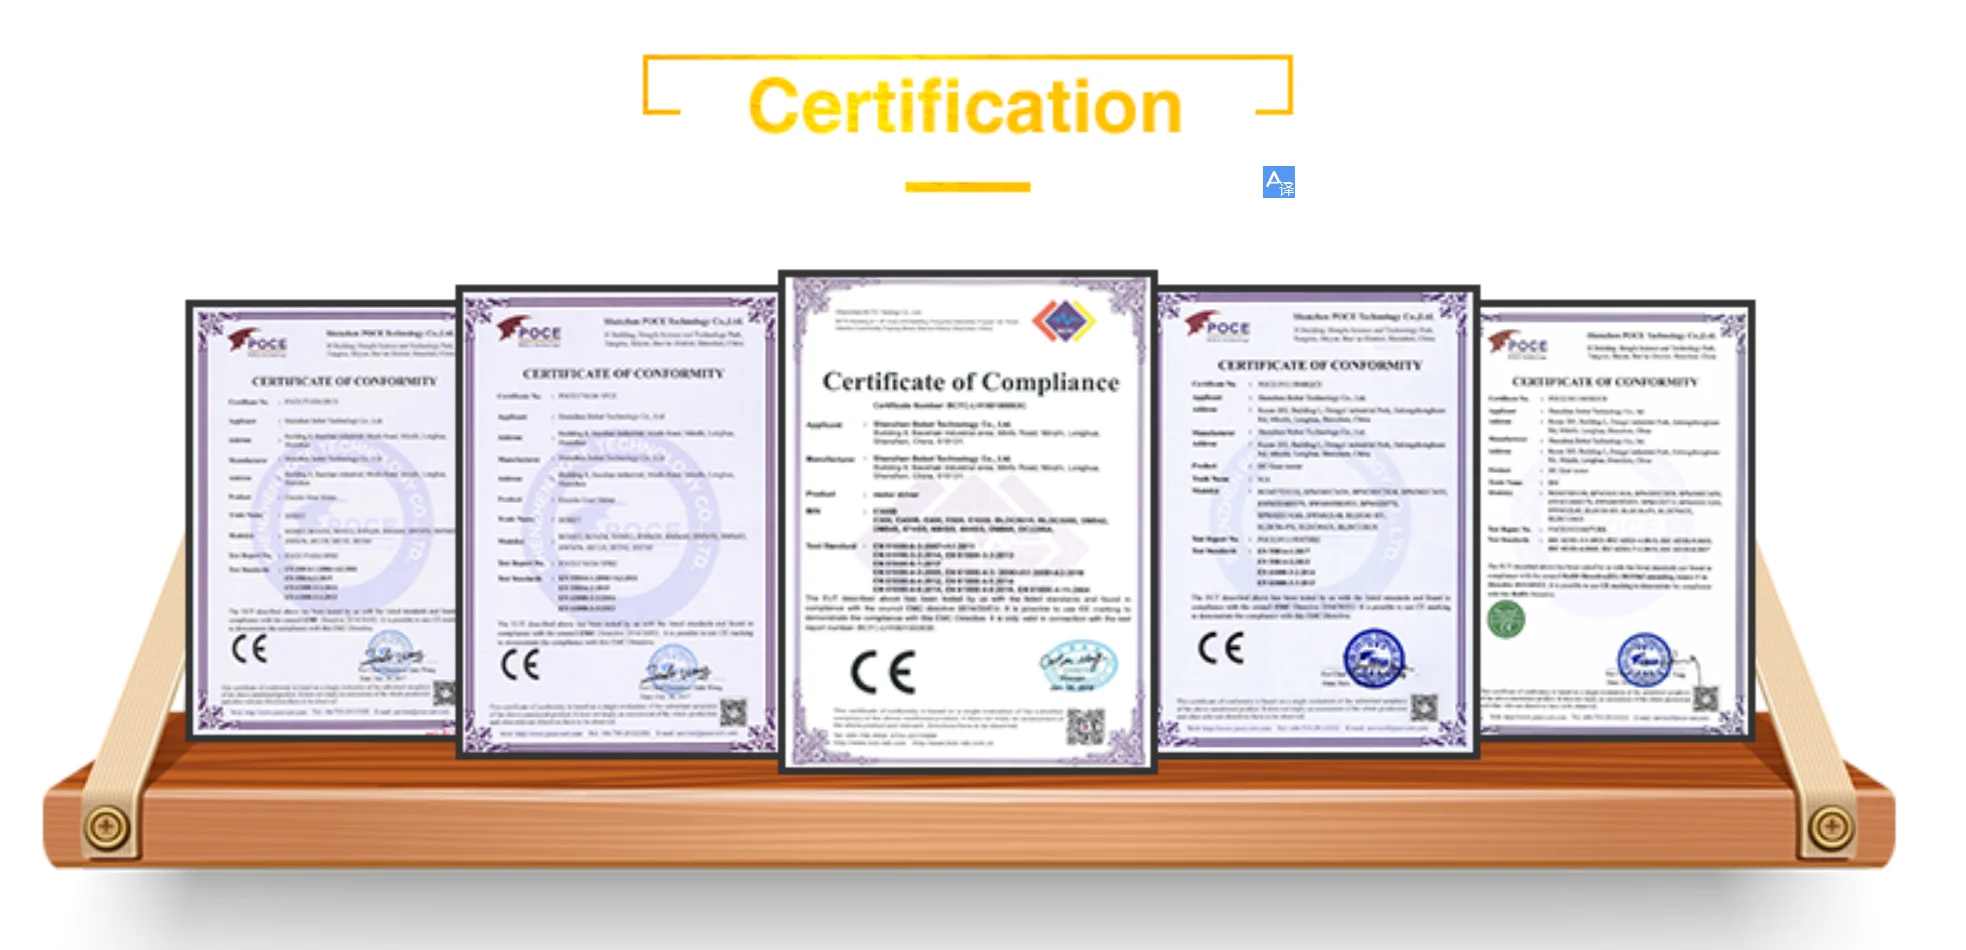 ISO9001 & ISO14001 certification CE certification reports CE Rohs VDE CCC ISO9000 ISO14000 Ul hundards of Many invention patents about motors and gearboxes